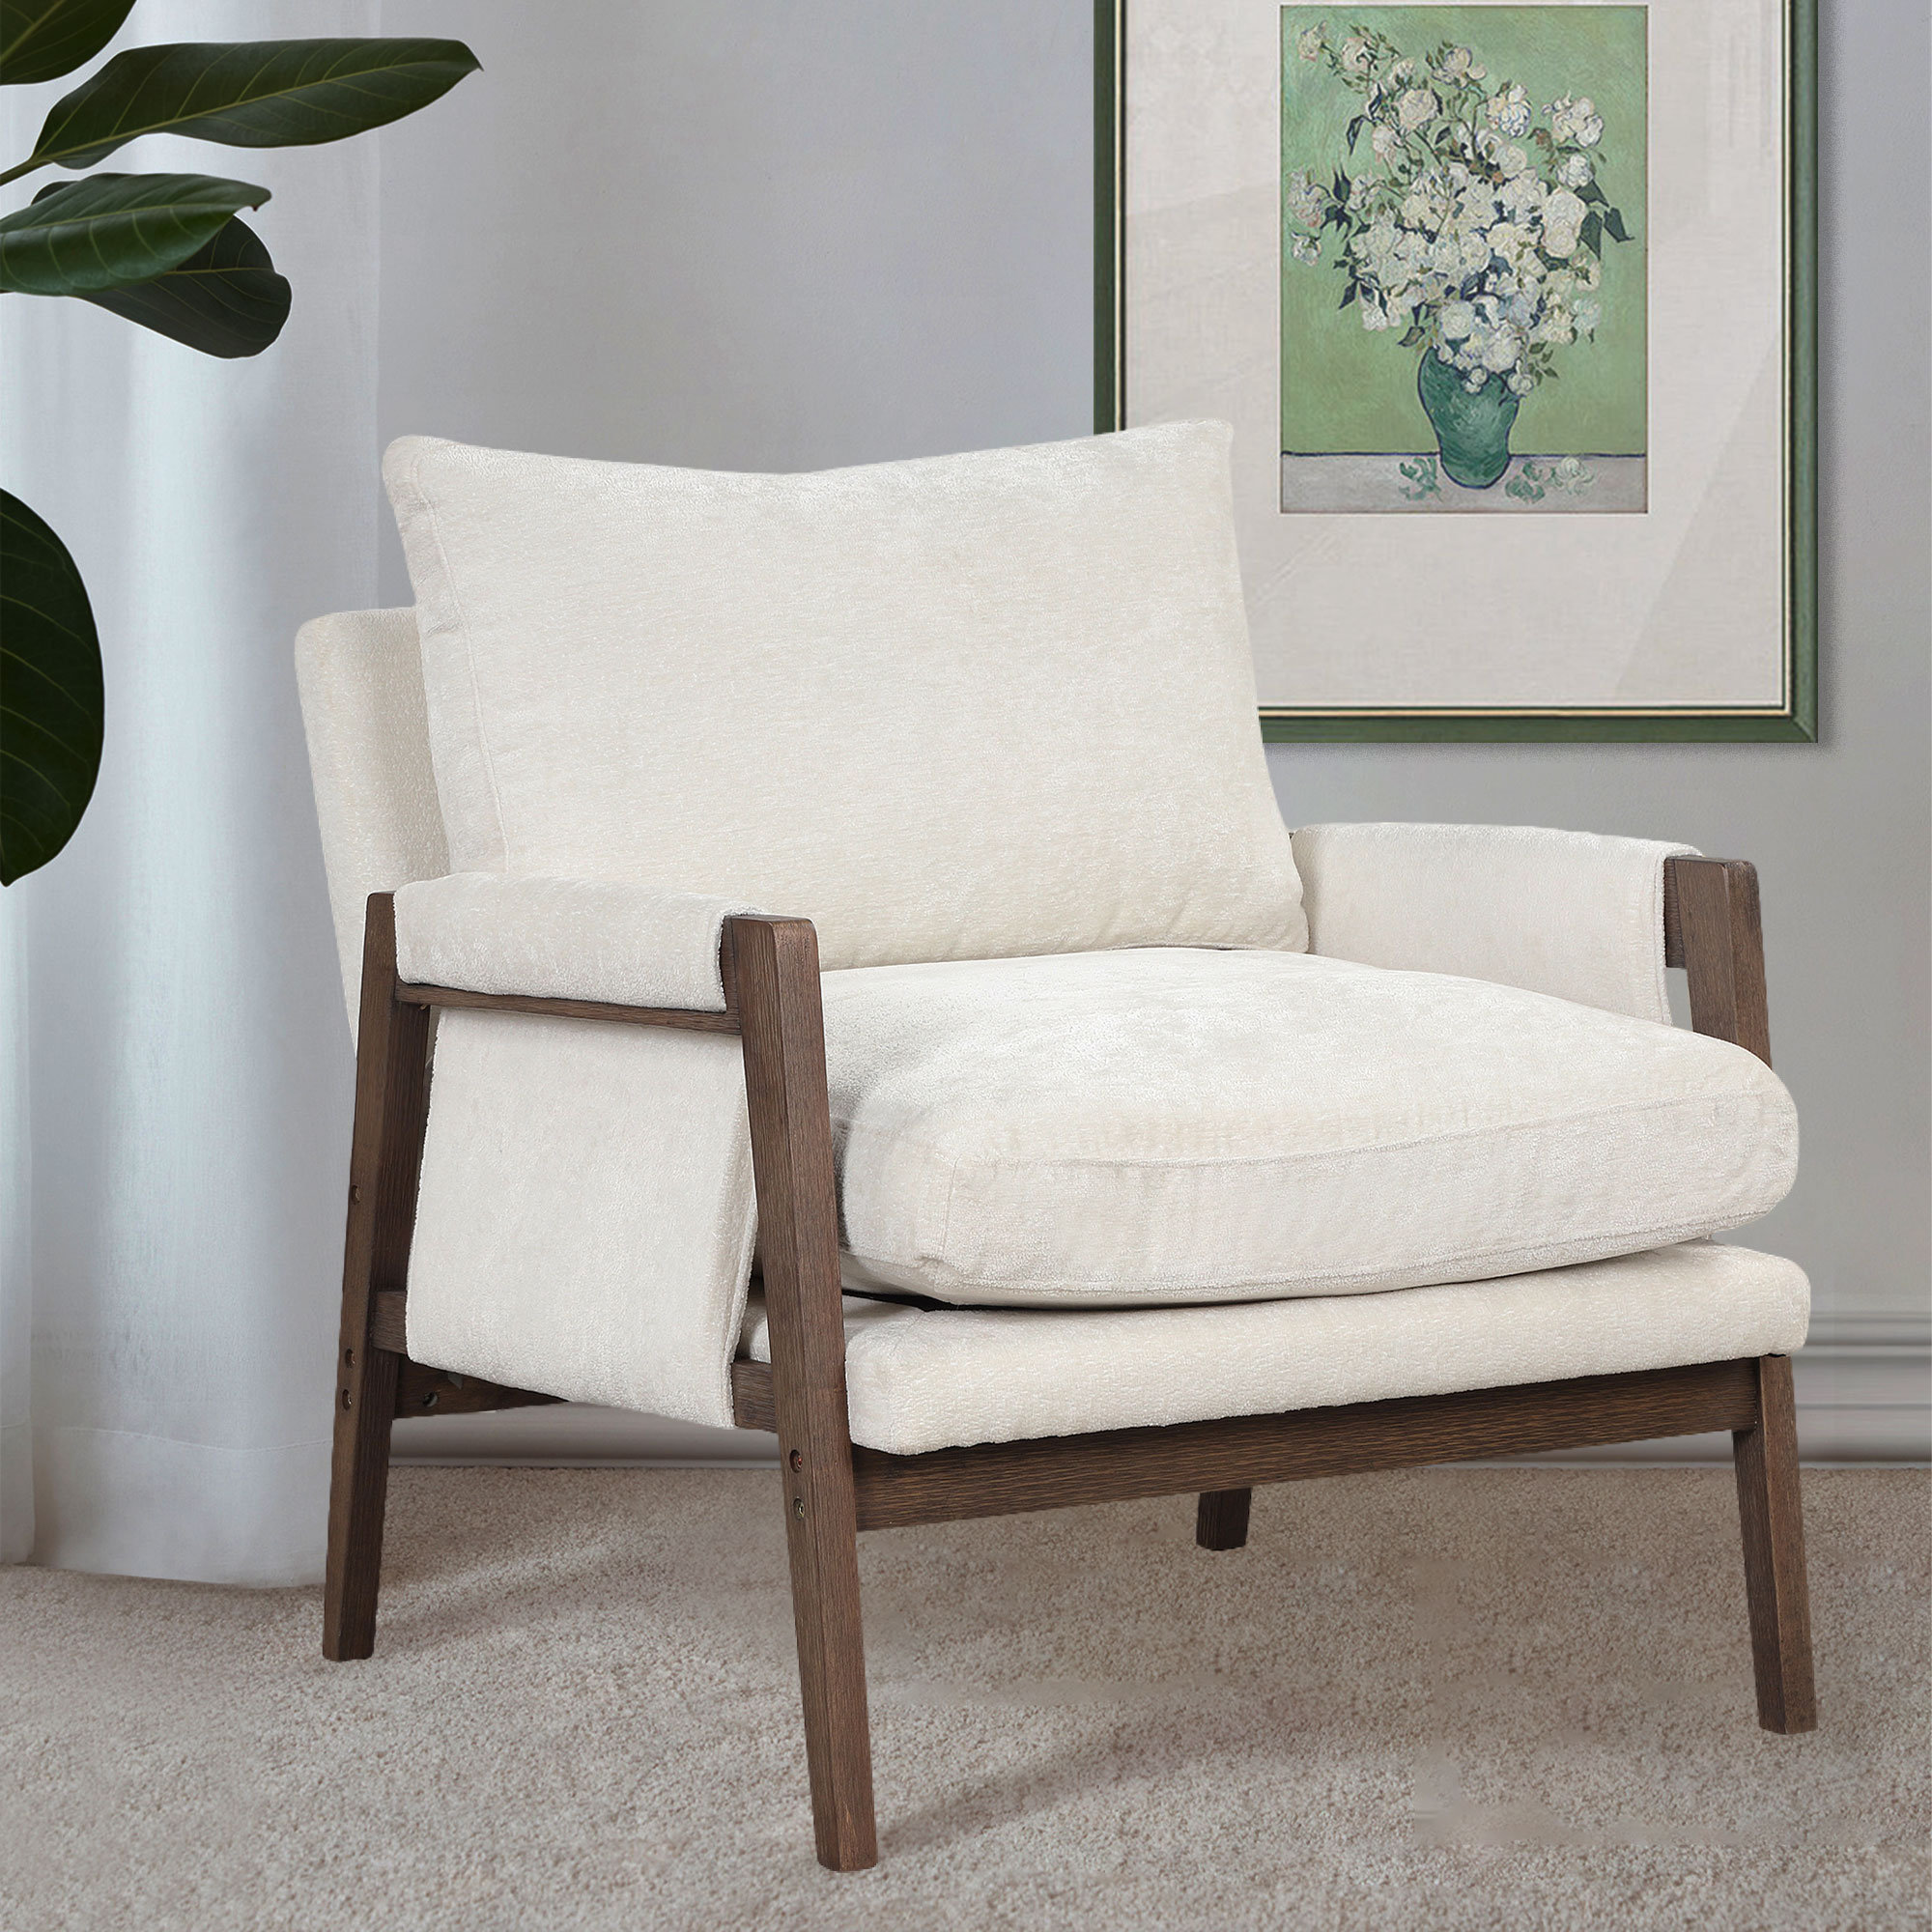 Velvet Accent Chair with Removable Seat Cushion Gracie Oaks Fabric: Gray Velvet